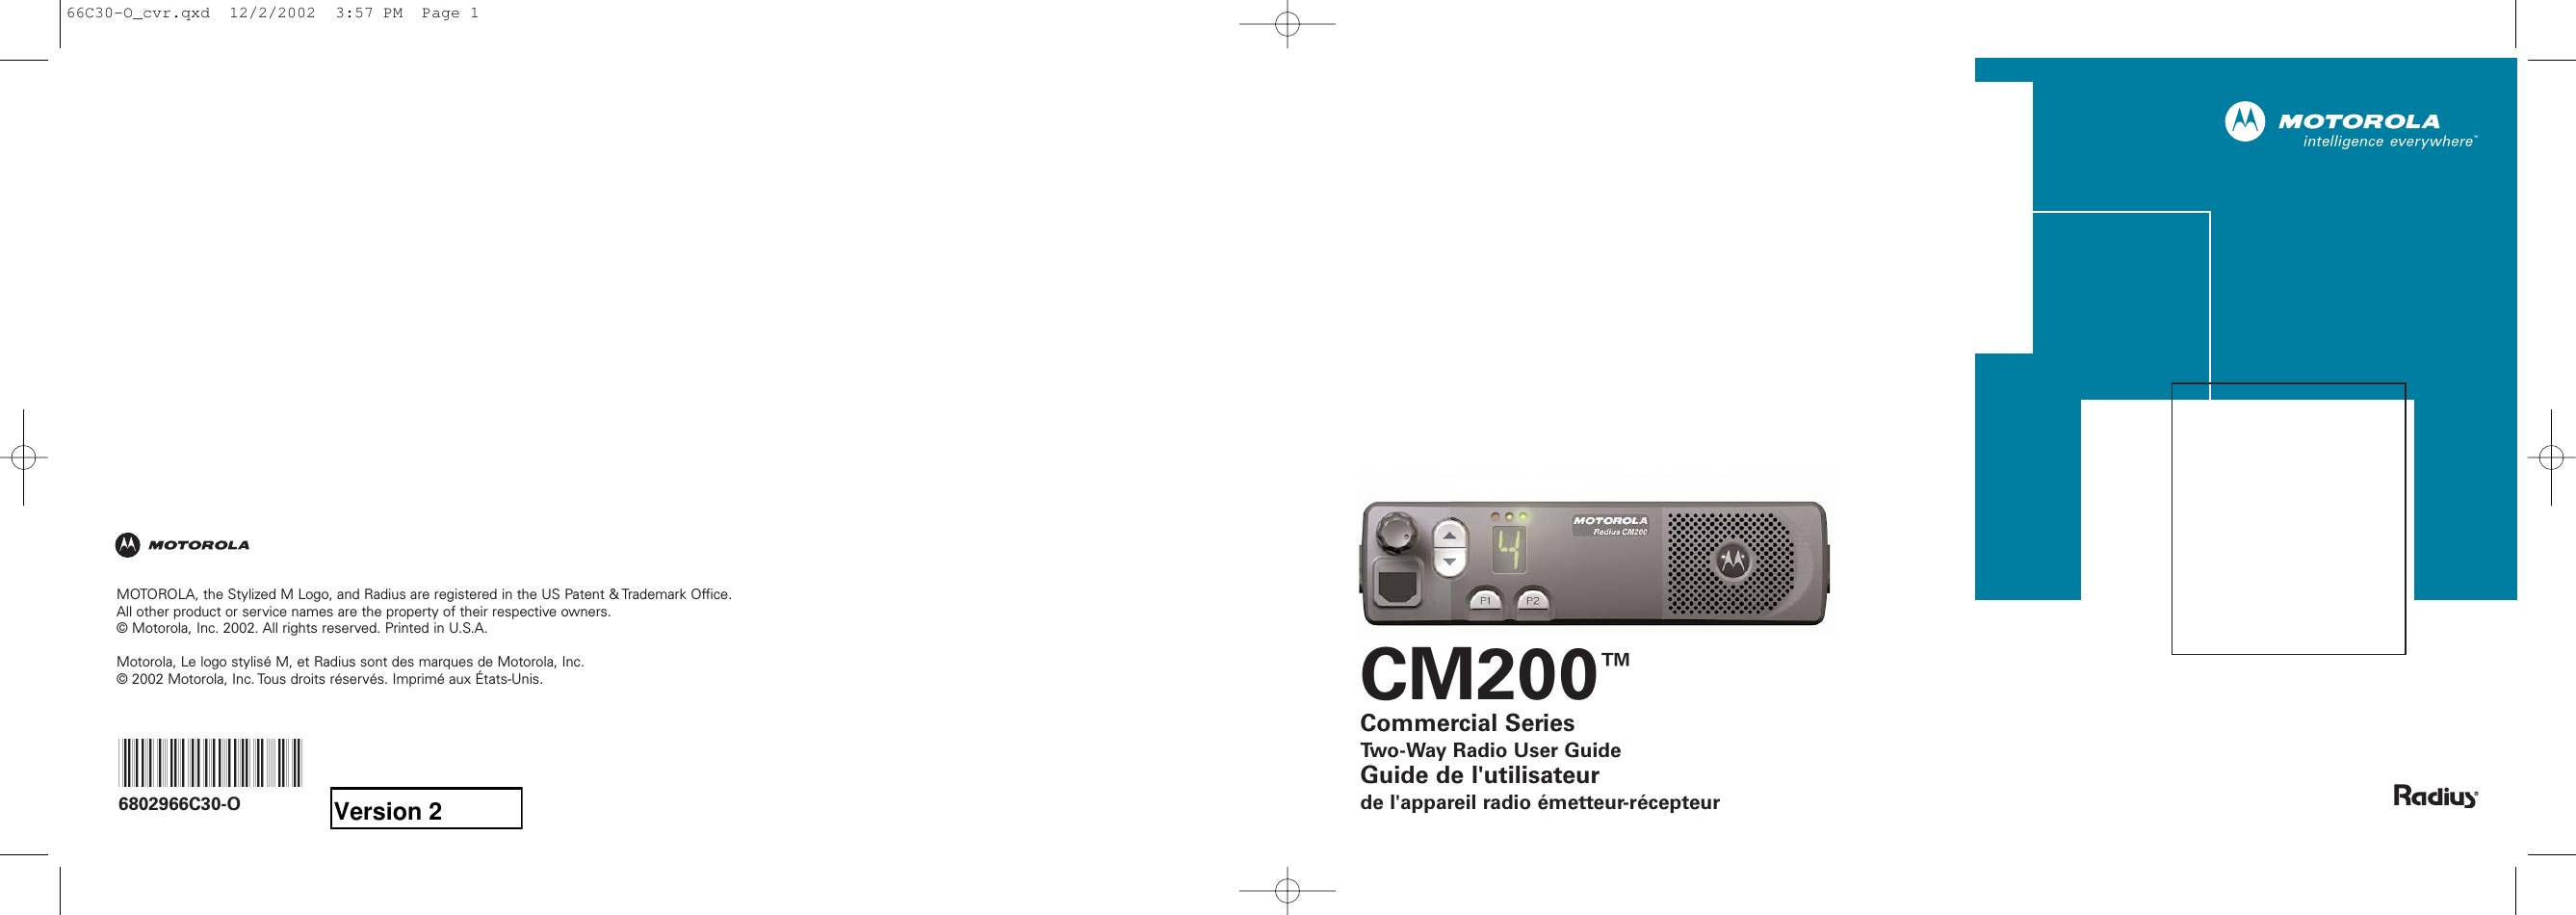 CM200™Commercial SeriesTwo-Way Radio User GuideGuide de l&apos;utilisateurde l&apos;appareil radio émetteur-récepteurMOTOROLA, the Stylized M Logo, and Radius are registered in the US Patent &amp; Trademark Office.All other product or service names are the property of their respective owners. © Motorola, Inc. 2002. All rights reserved. Printed in U.S.A.Motorola, Le logo stylisé M, et Radius sont des marques de Motorola, Inc.© 2002 Motorola, Inc. Tous droits réservés. Imprimé aux États-Unis.*6802966C30*6802966C30-O66C30-O_cvr.qxd  12/2/2002  3:57 PM  Page 1Version 2